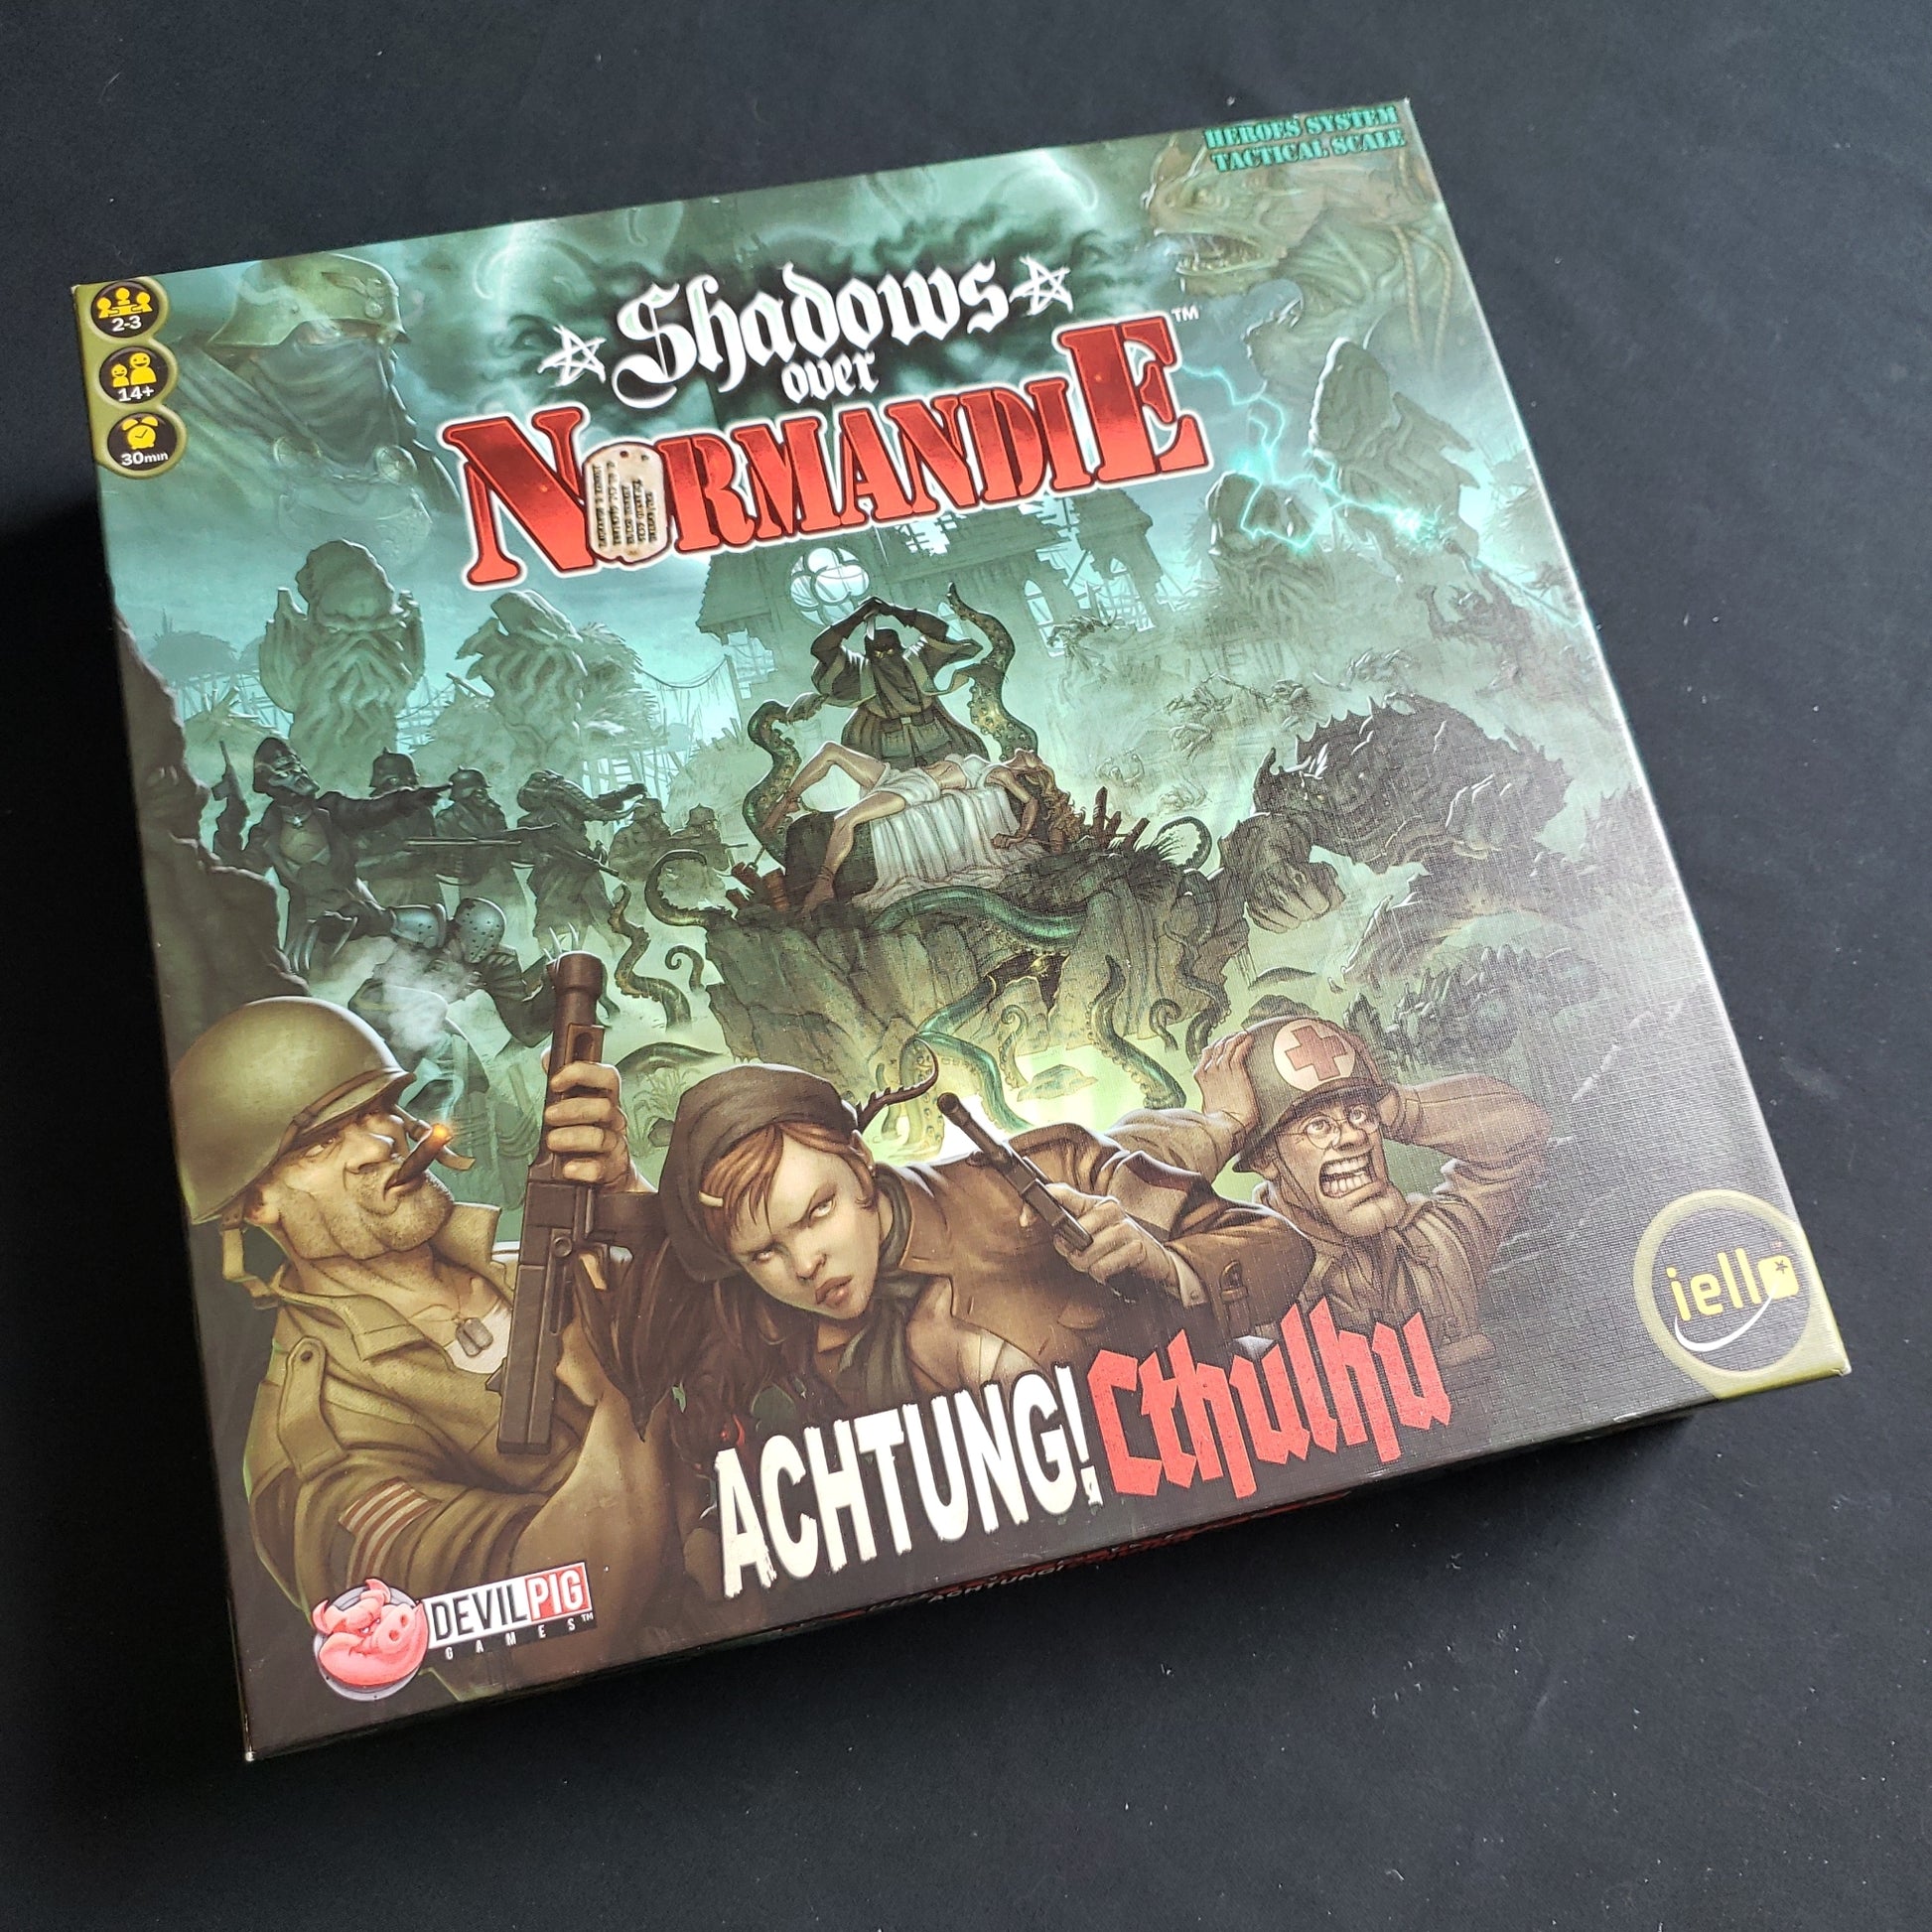 Image shows the front cover of the box of the Shadows Over Normandie board game